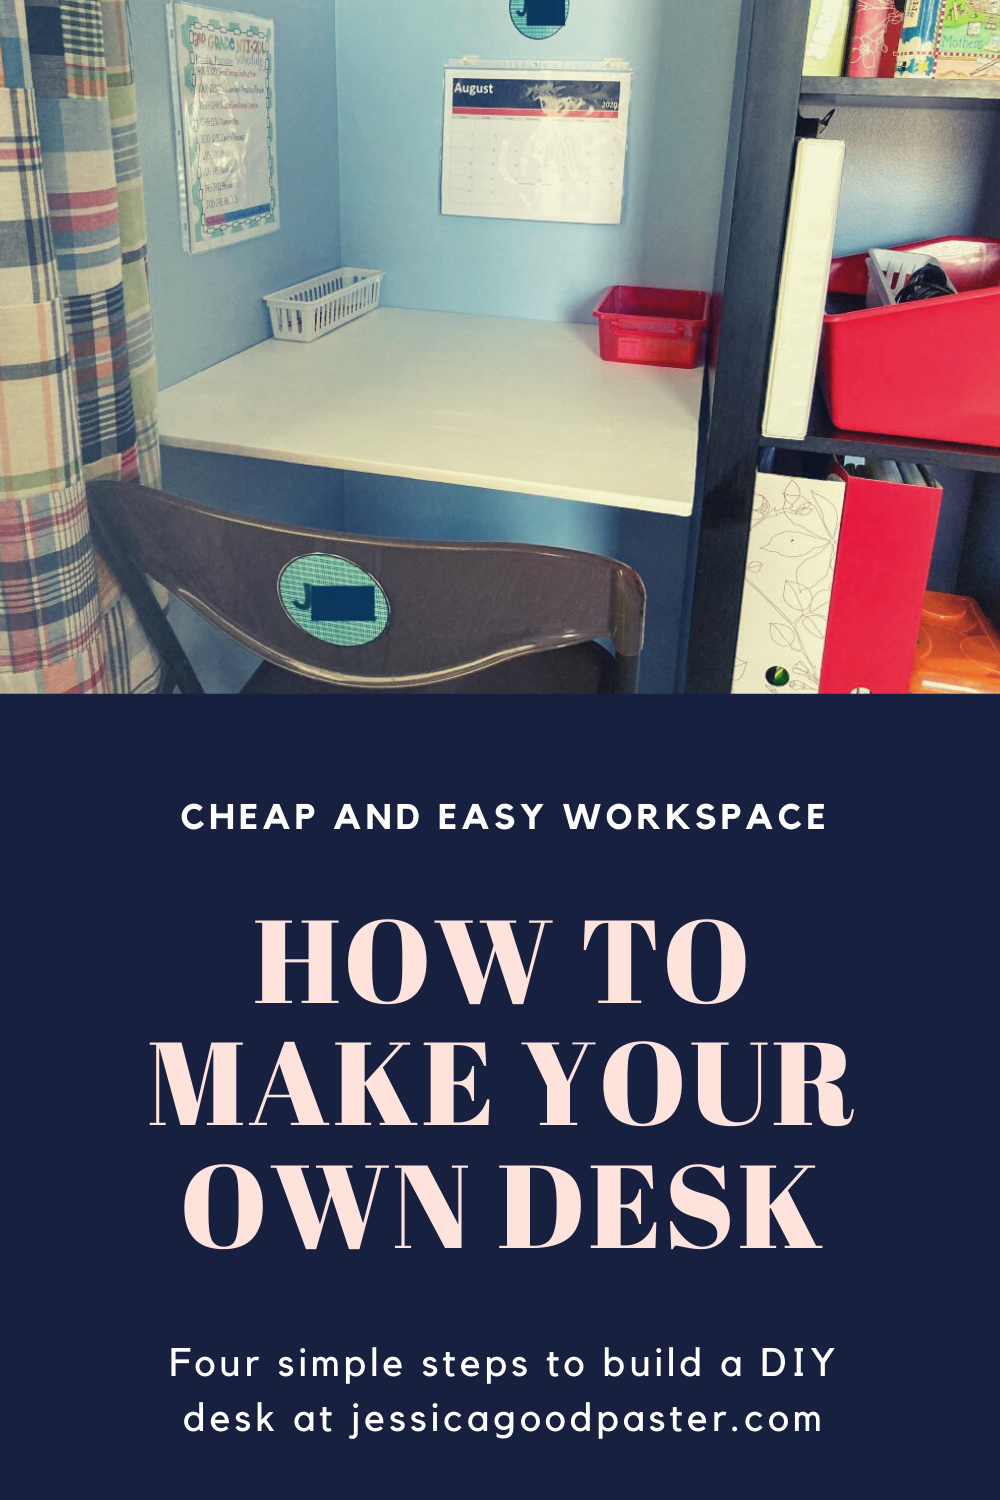 How to Make a Simple DIY Desk | Make the perfect virtual learning workspace from scratch for less than $20 with these easy instructions. This DIY desk is cheap can be used in a kid's bedroom, playroom, or office. It is great for small spaces and I made the desk from materials already in my garage in time for back to school. #backtoschool #diydesk #virtuallearning #distancelearning #homeschool #backtoschool2020